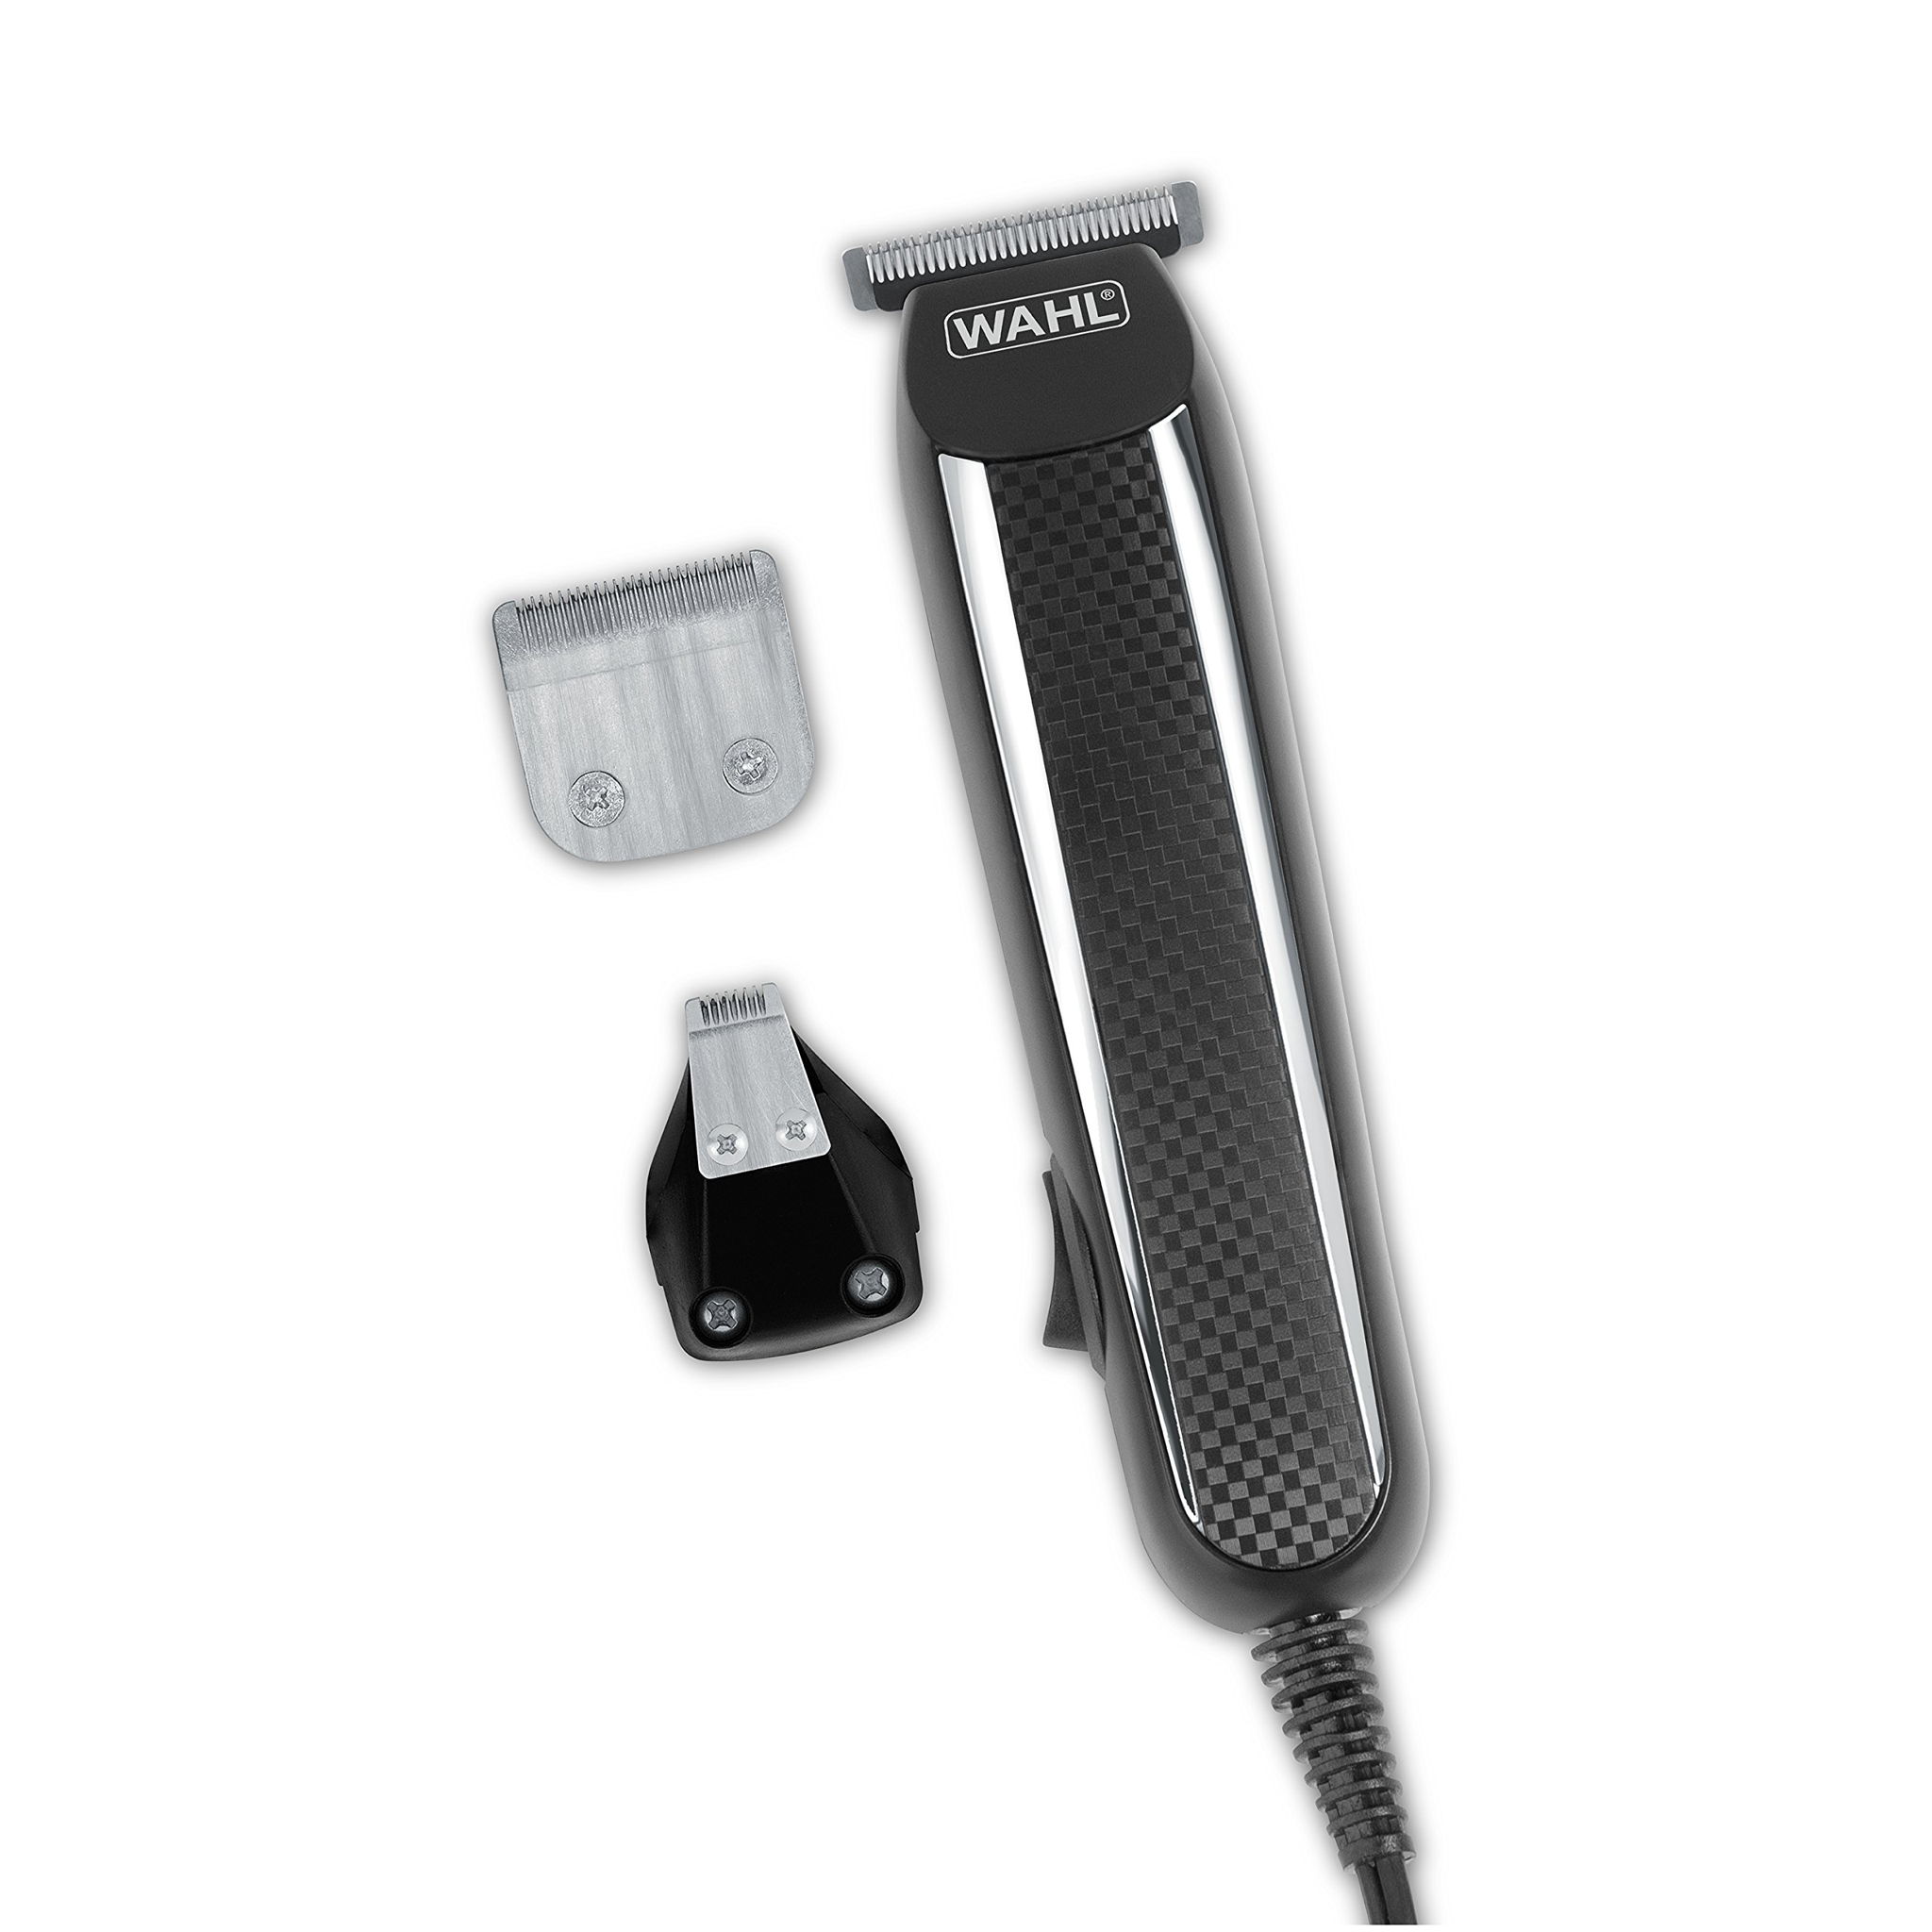 philips one blade review reddit